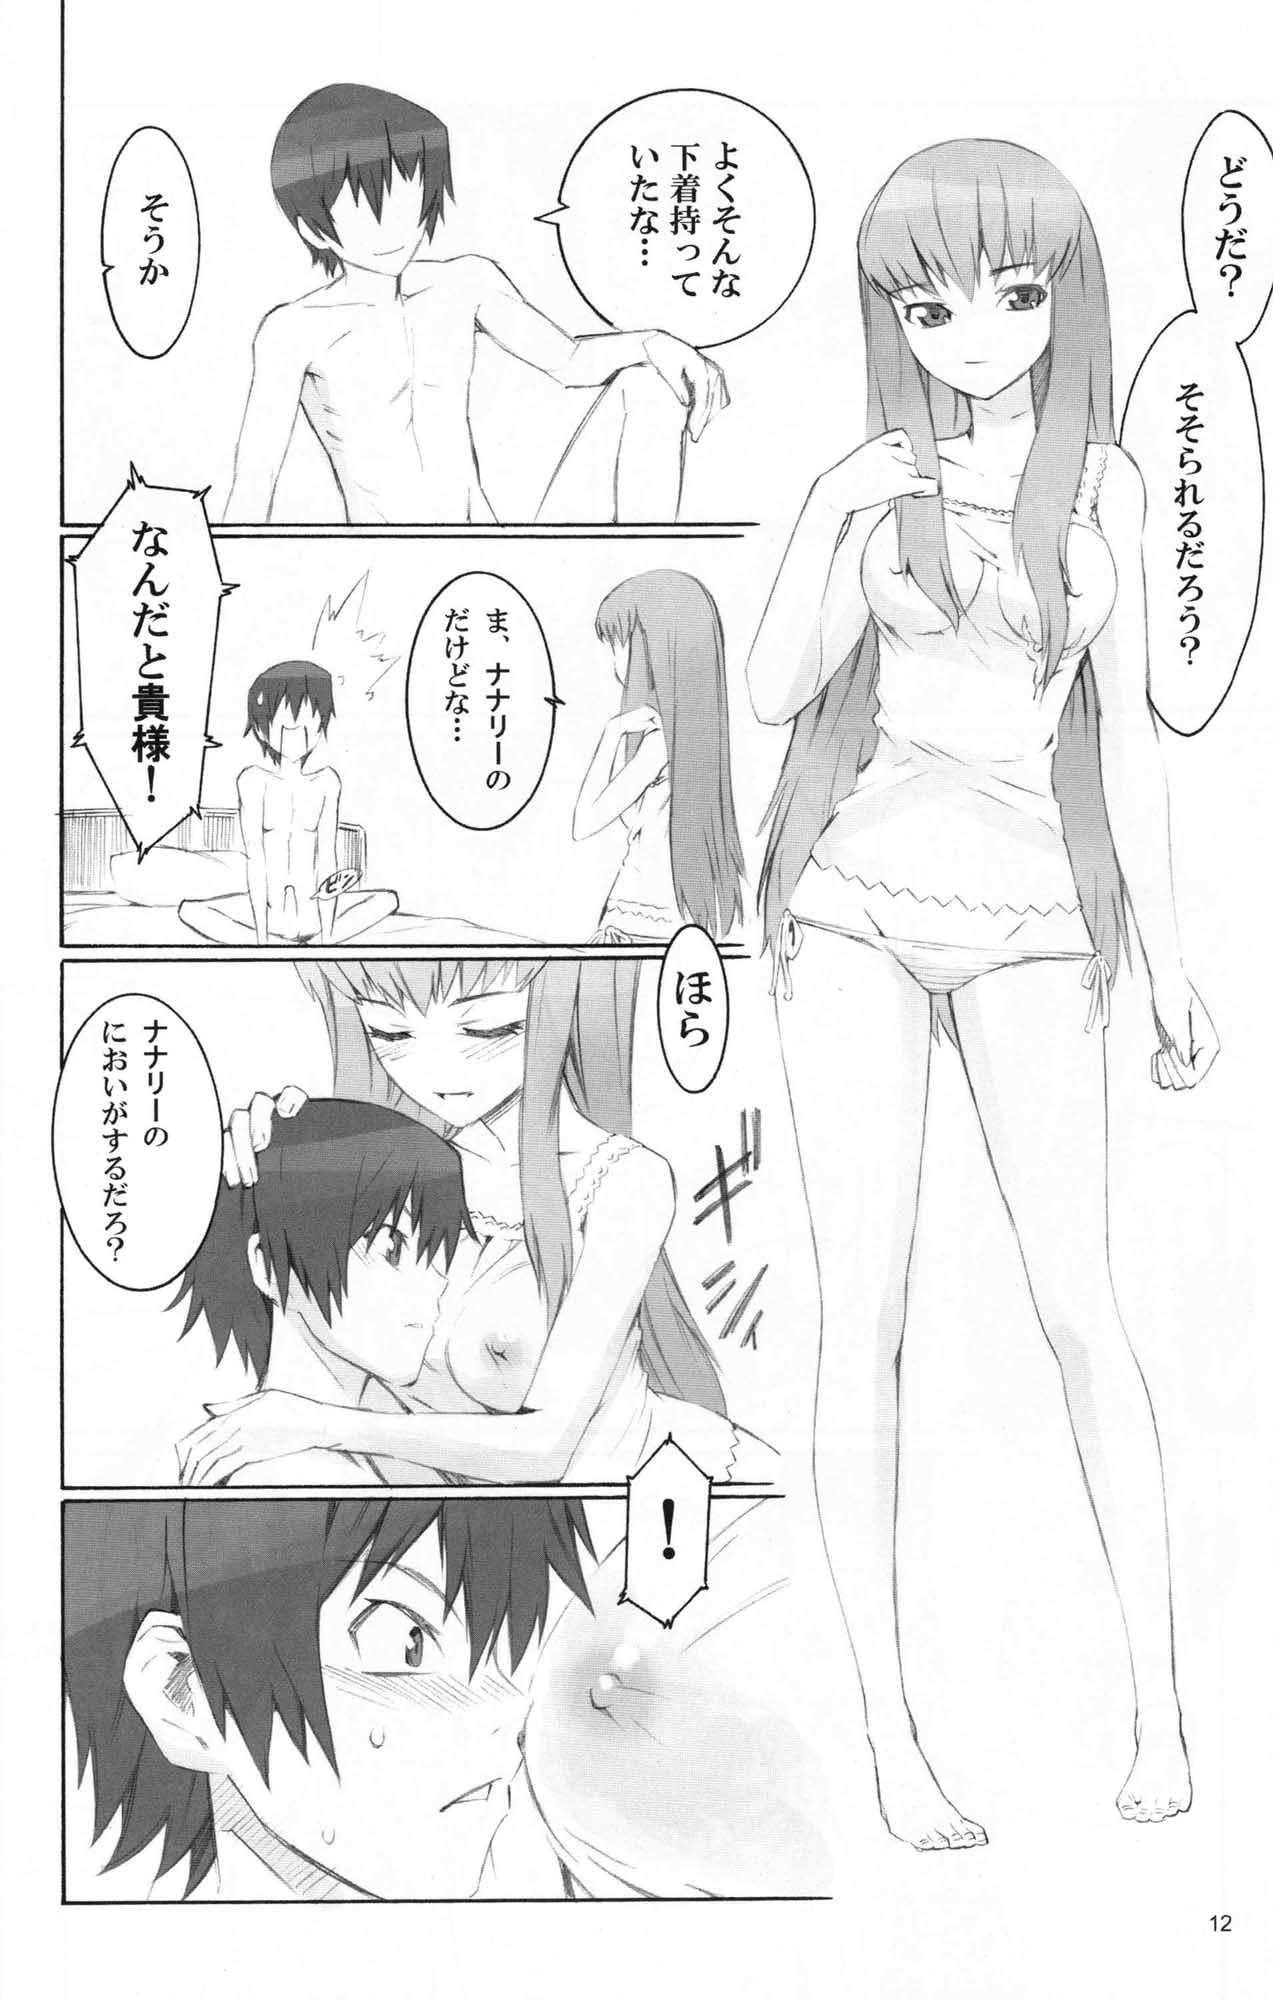 Doggystyle Porn SOULFLY 4 - Code geass Tiny Girl - Page 11